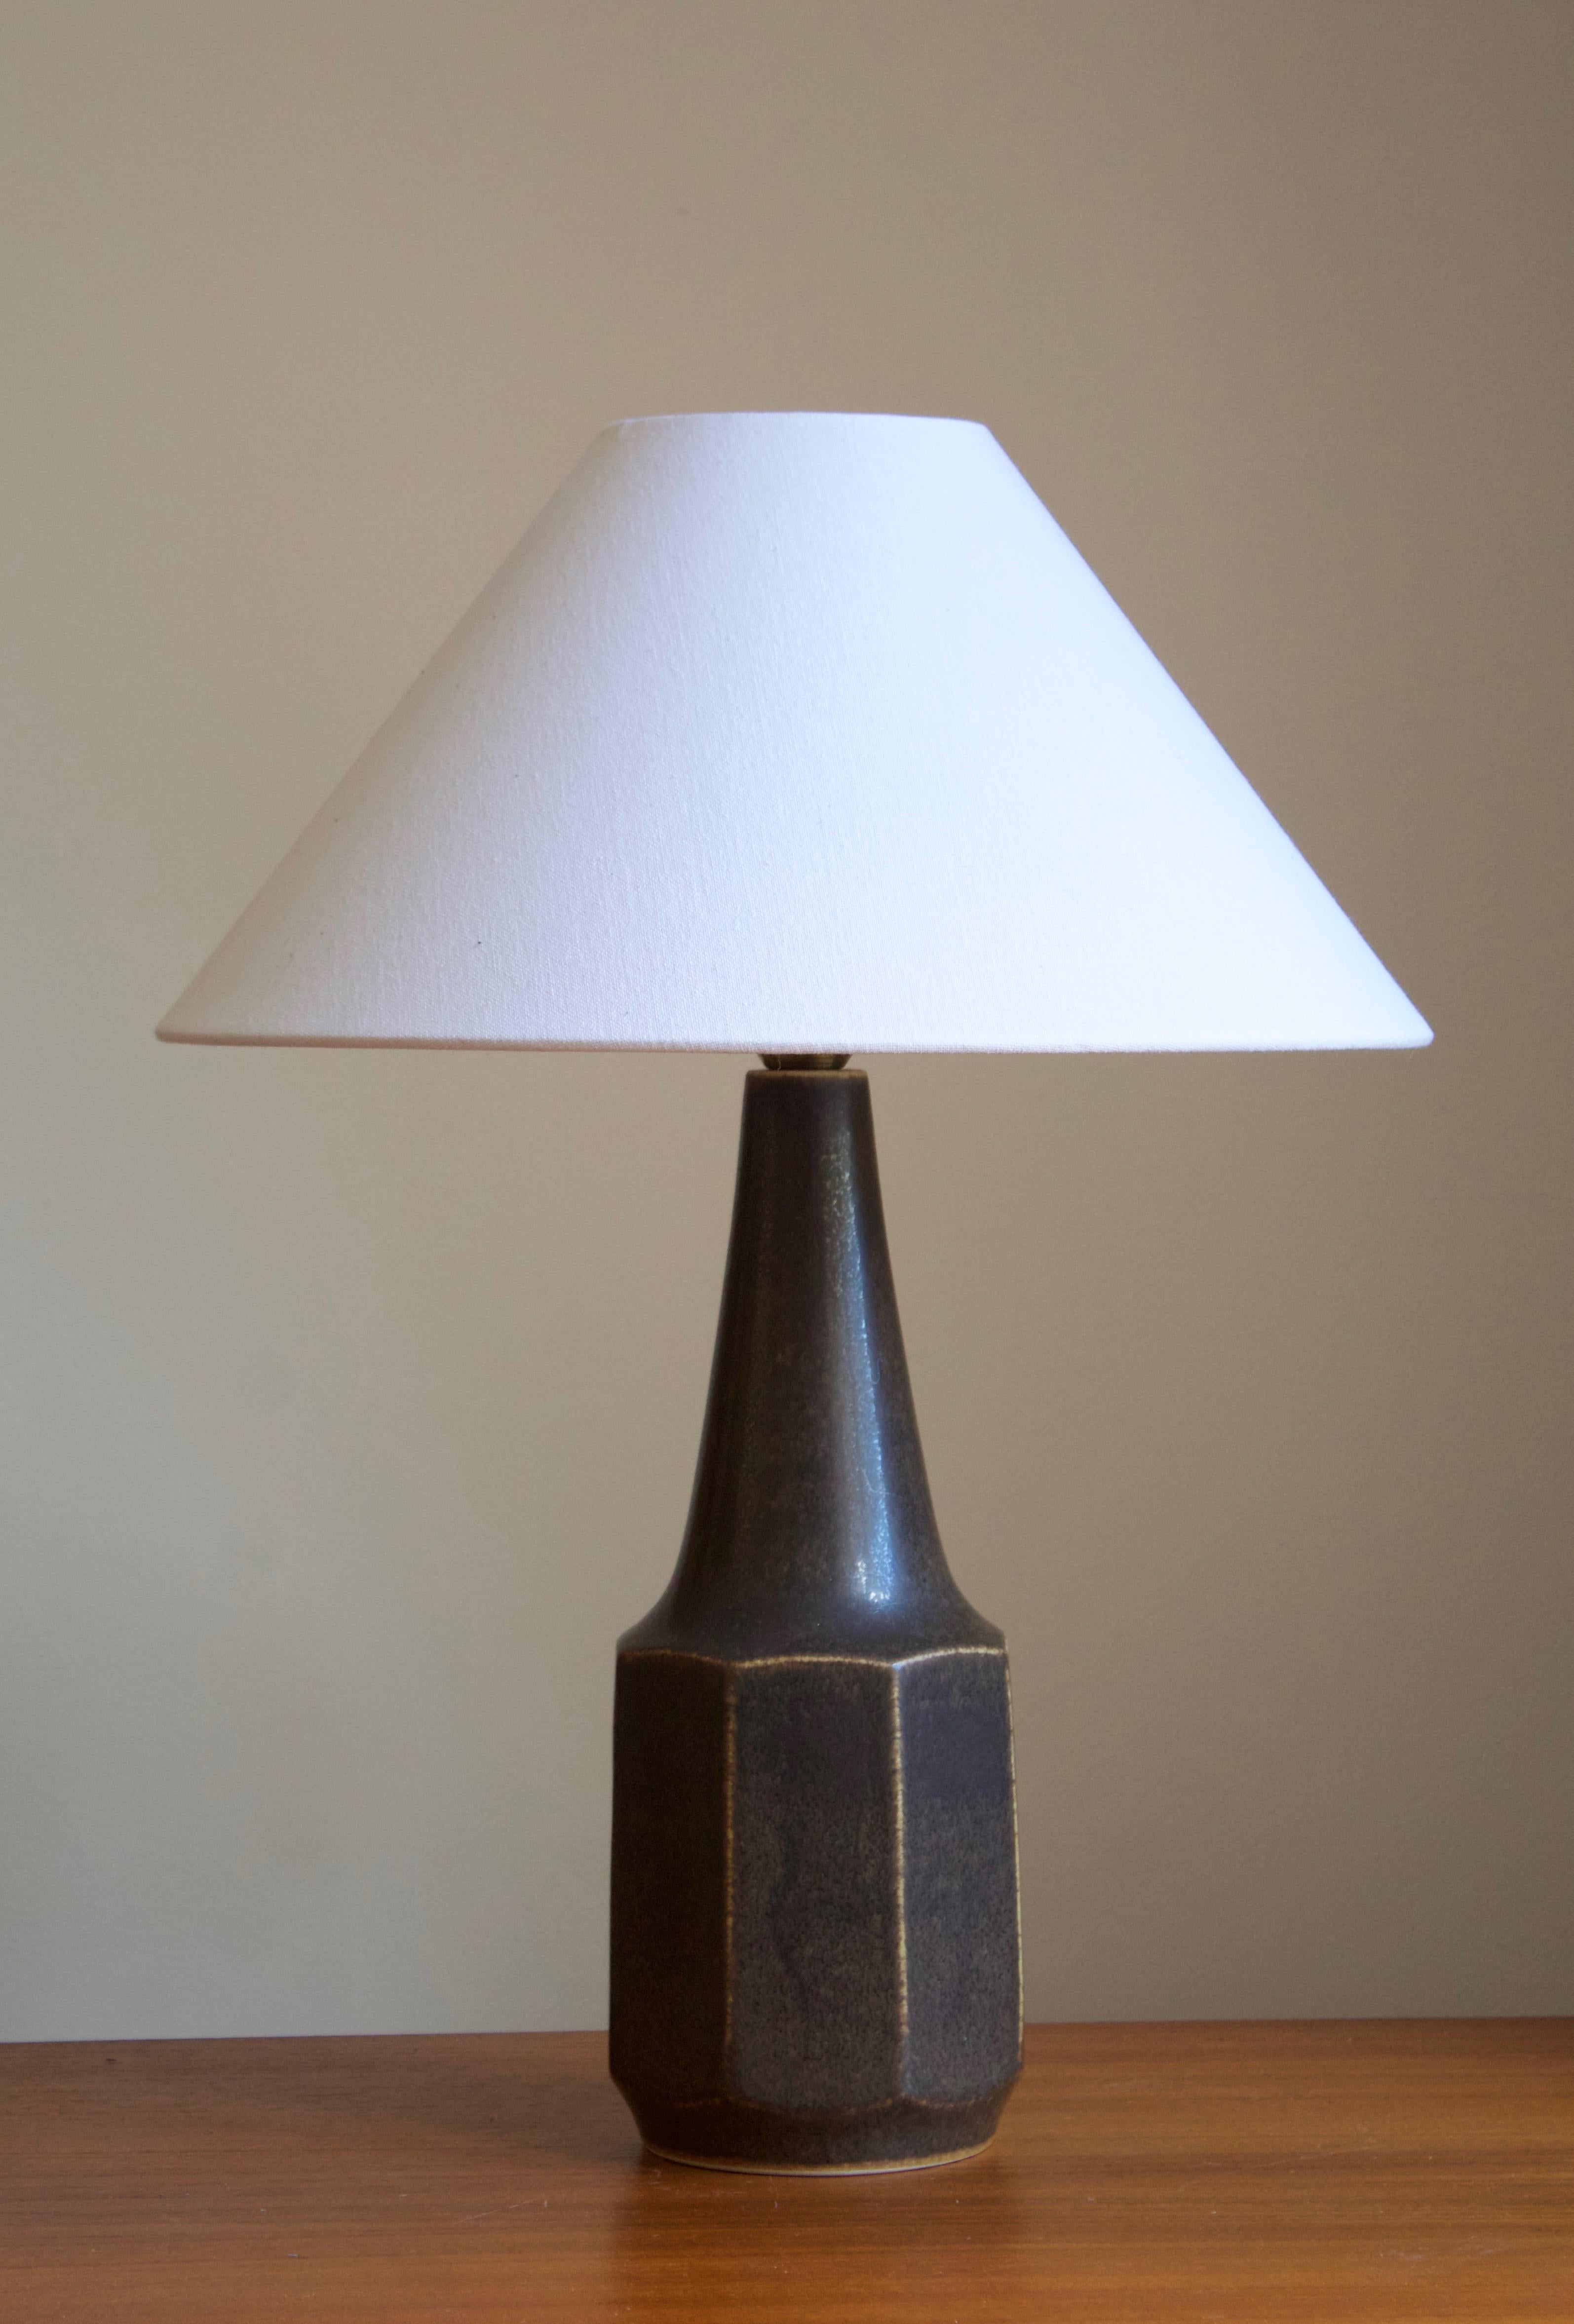 A table lamp designed by Marianne Starck produced by Michael Andersen Keramik.

Stated measurements excluding lampshade. Height includes socket. Sold without lampshade.

Glaze features a brown color.

Other ceramicists of the period include Axel